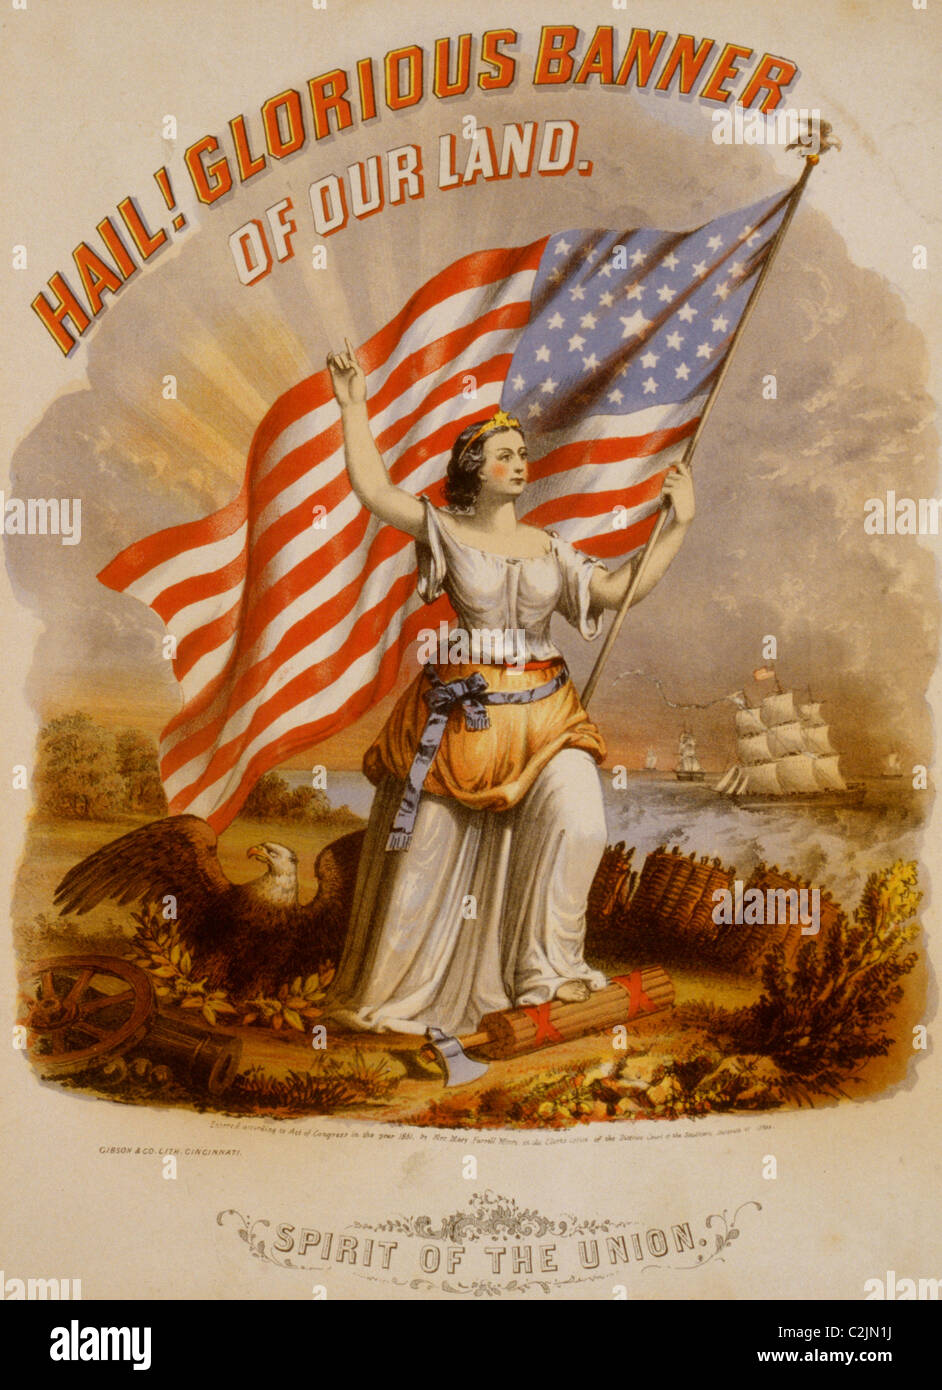 Hail! Glorious banner of our land. Spirit of the Union / Gibson & Co. lith., Cincinnati. Stock Photo